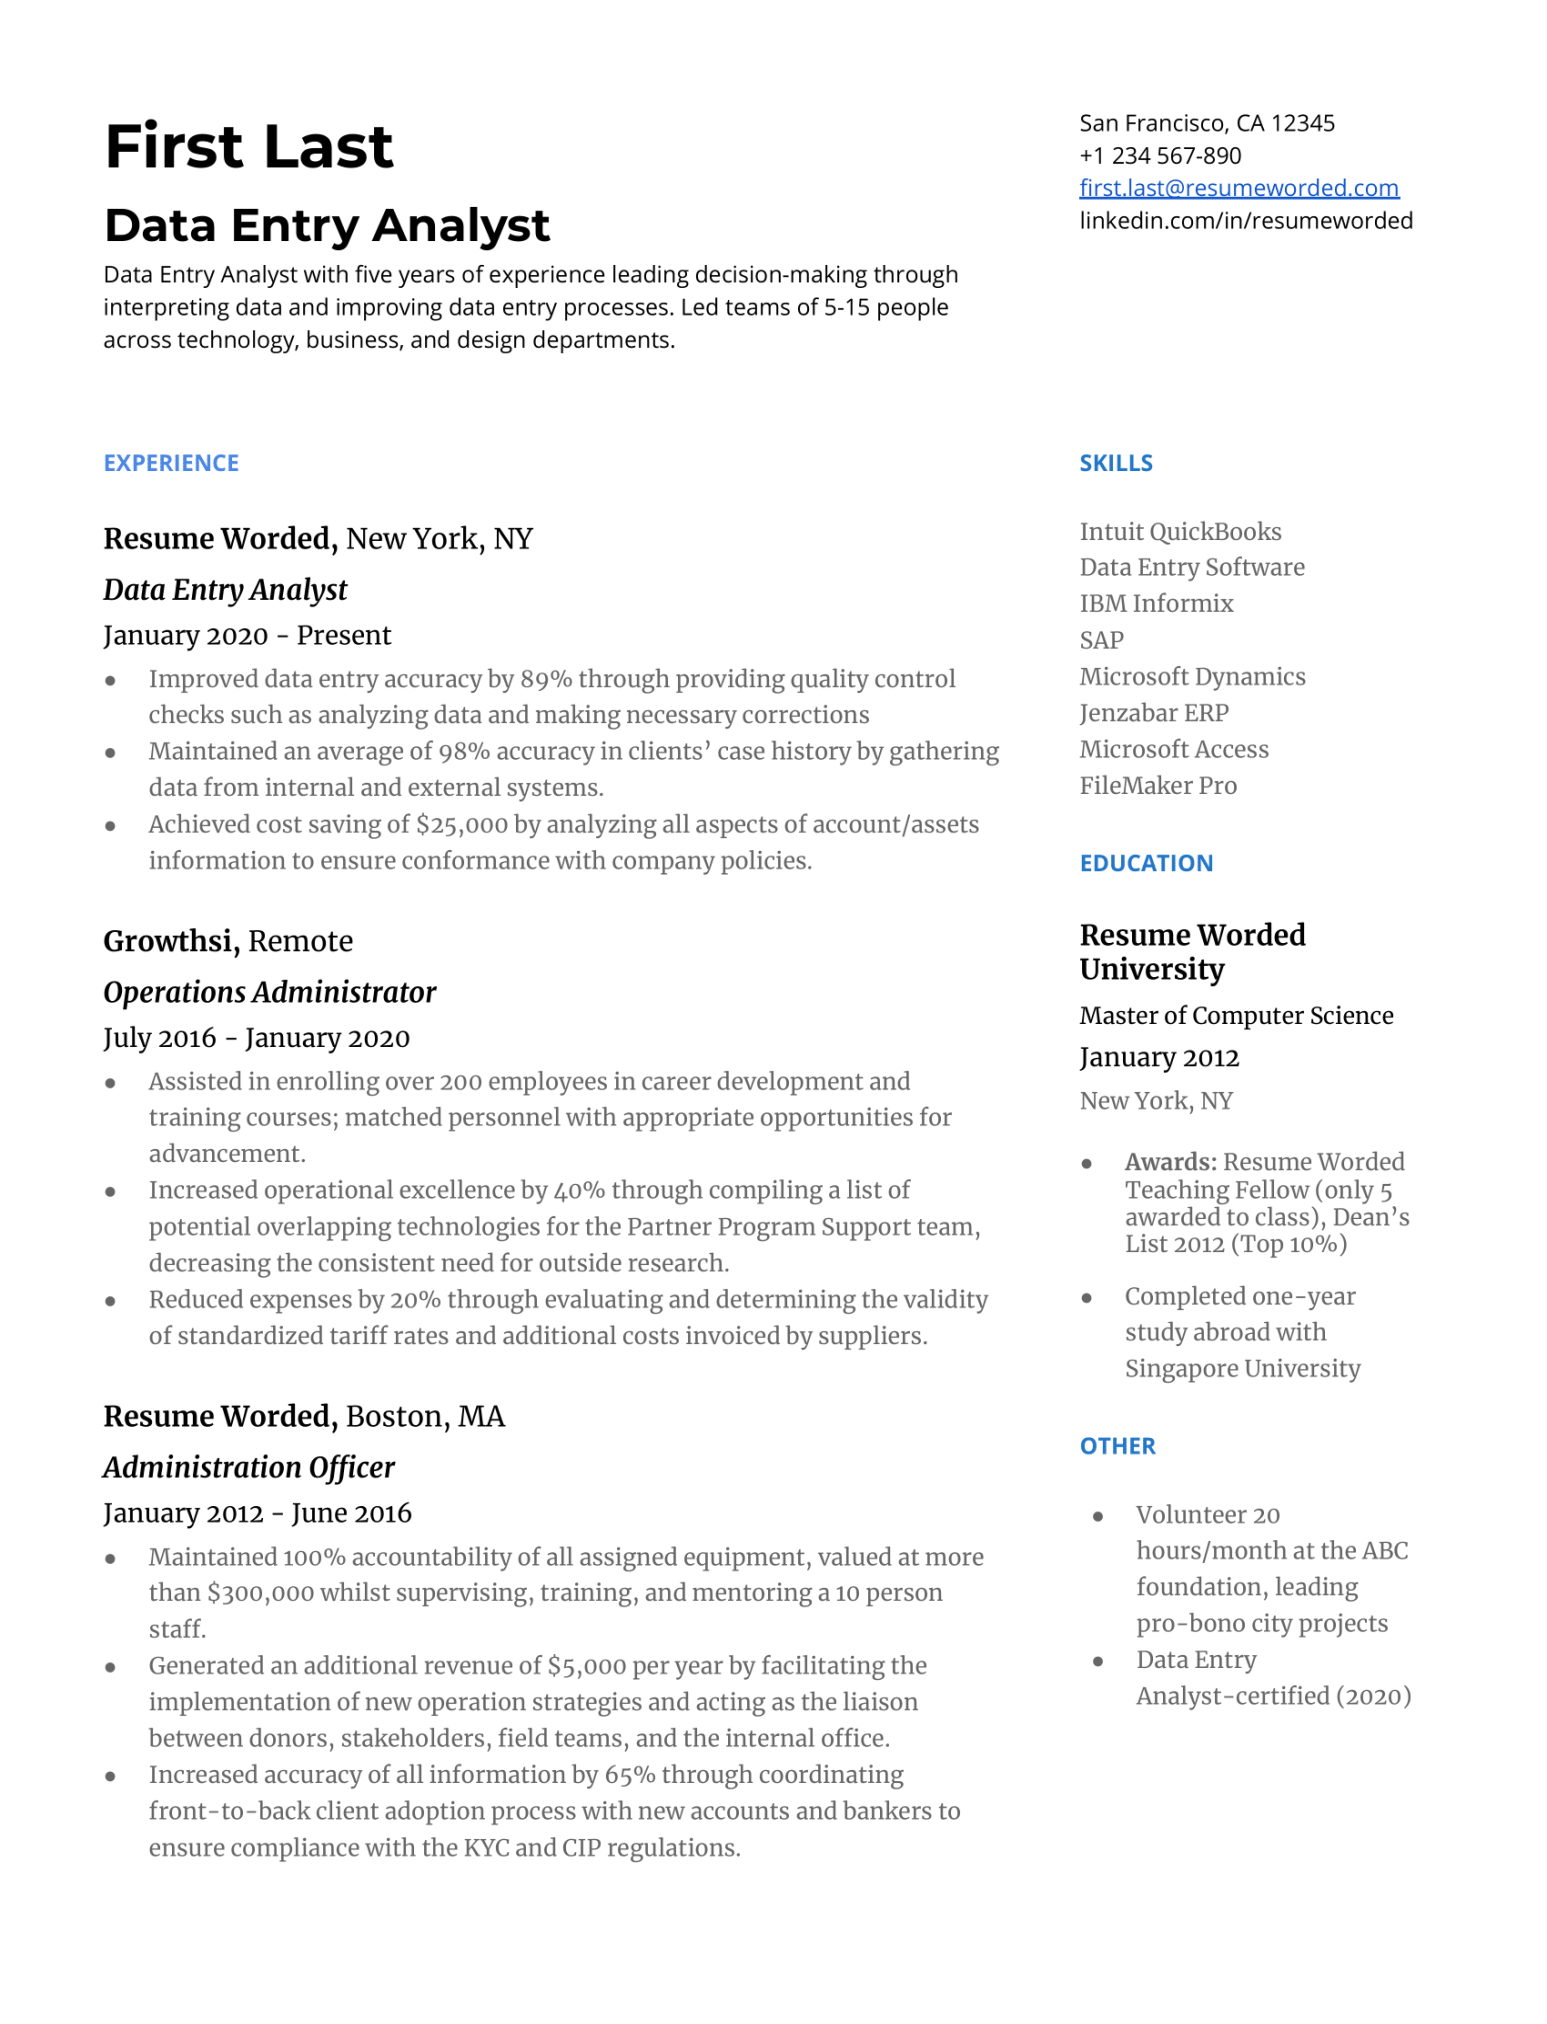 Data Entry Resume Examples for   Resume Worded